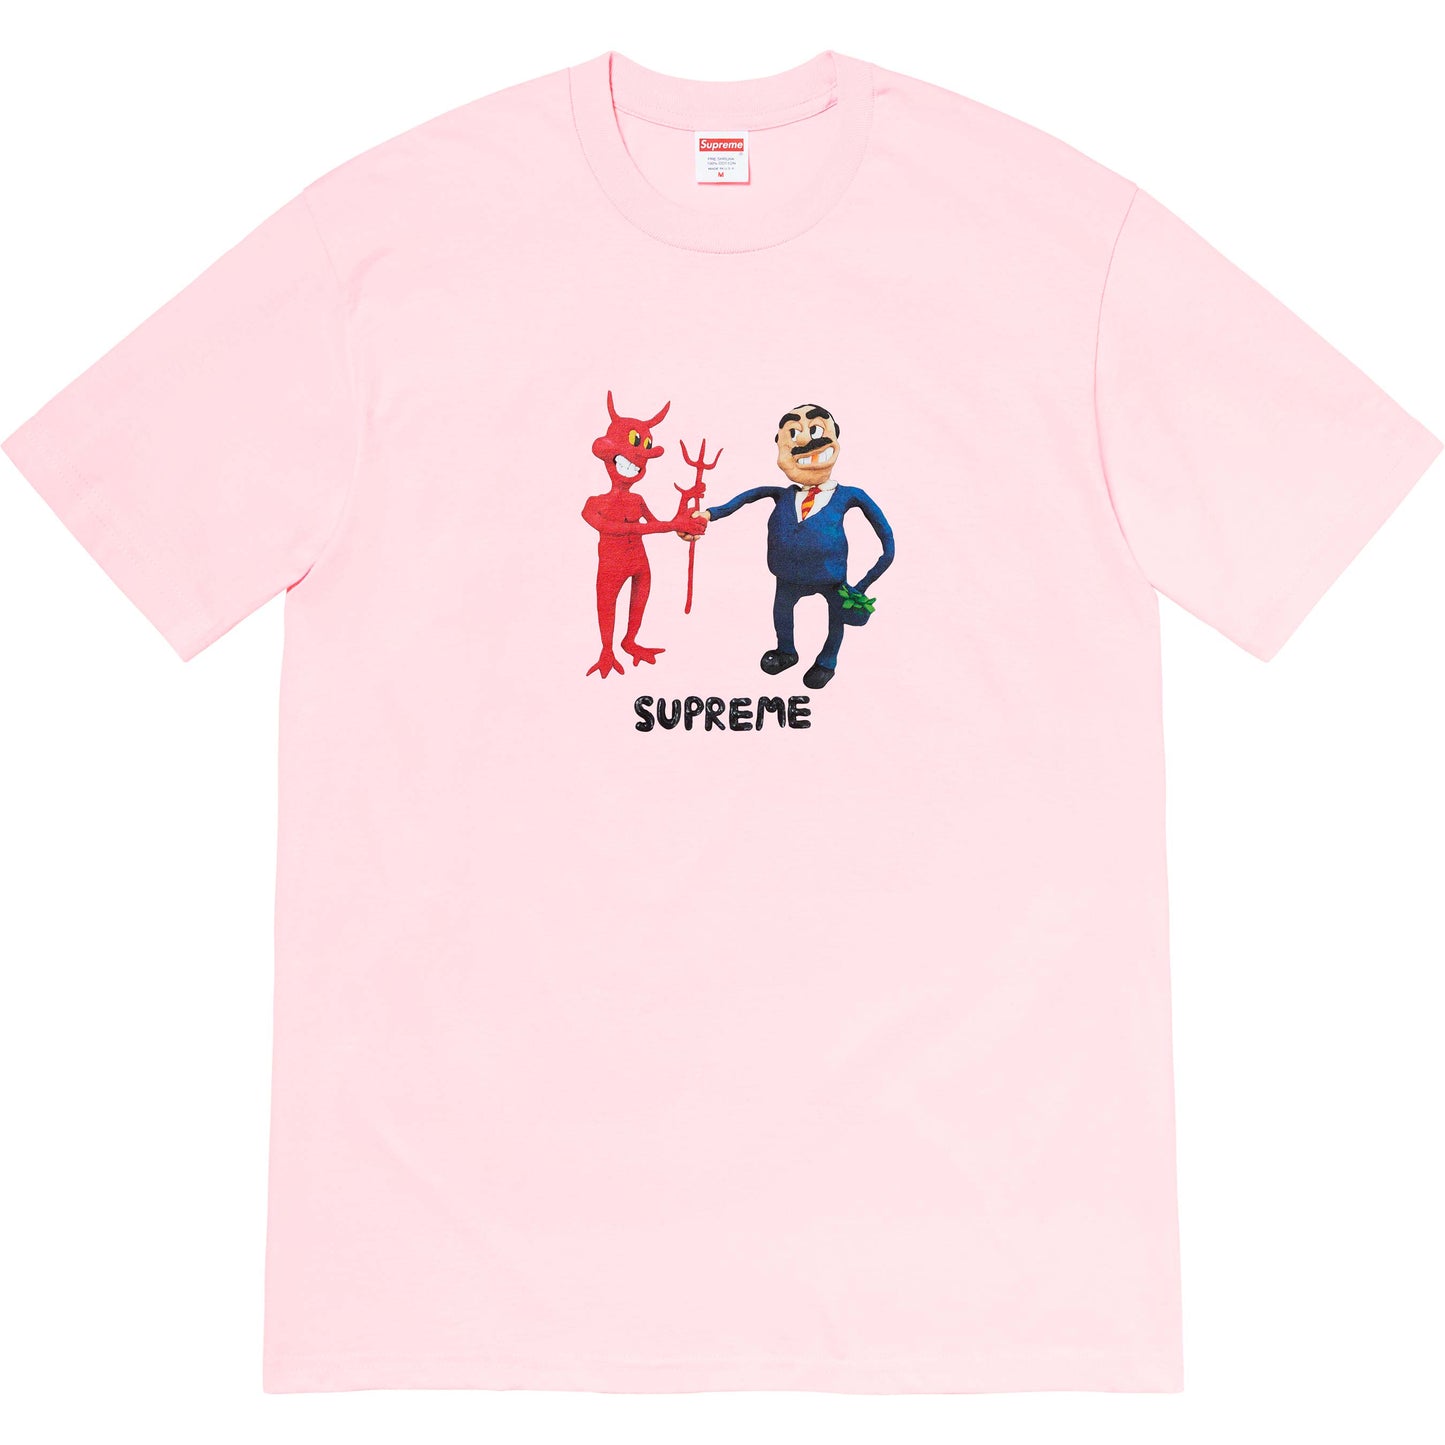 Supreme Business Tee Light Pink from Supreme